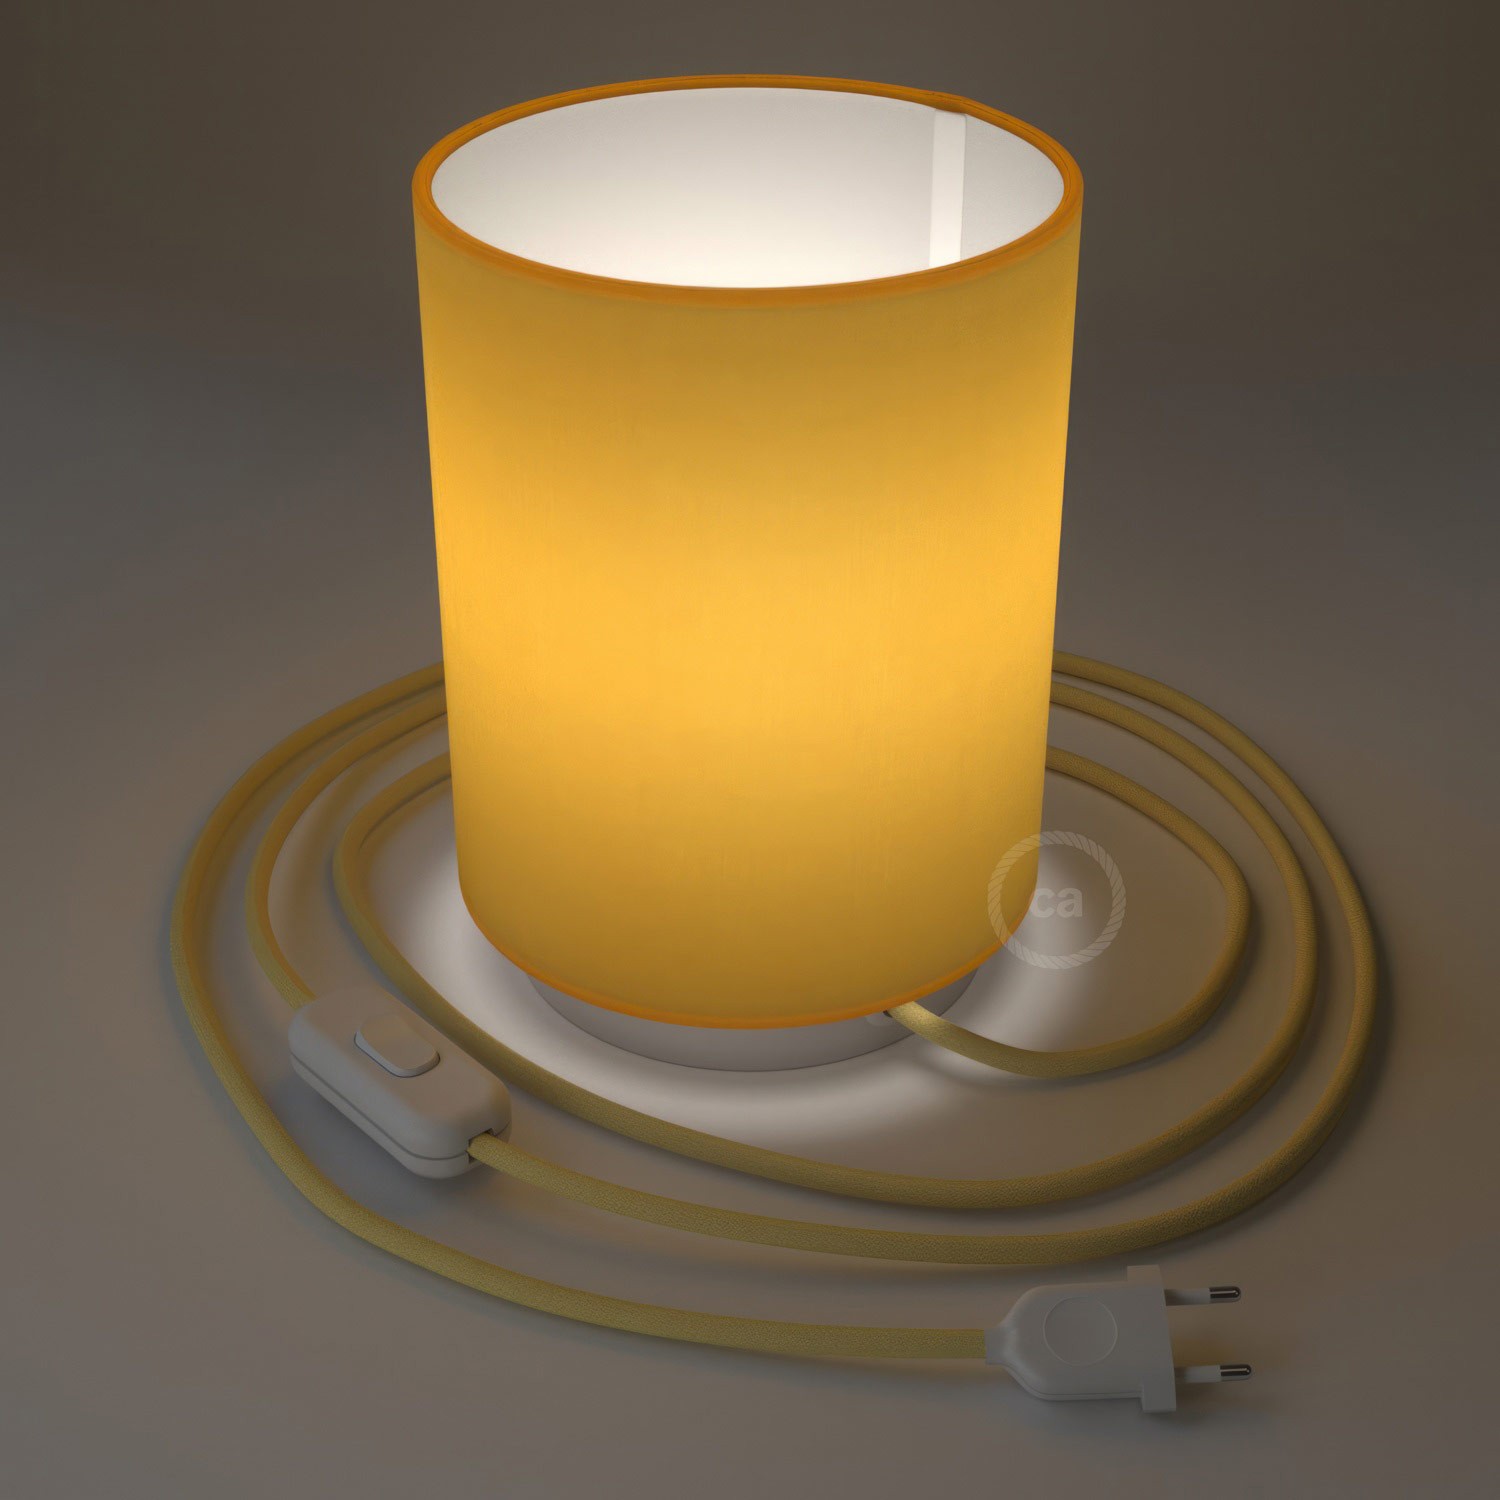 Posaluce in metal with Bright Yellow Cilindro lampshade, complete with fabric cable, switch and 2-pin plug